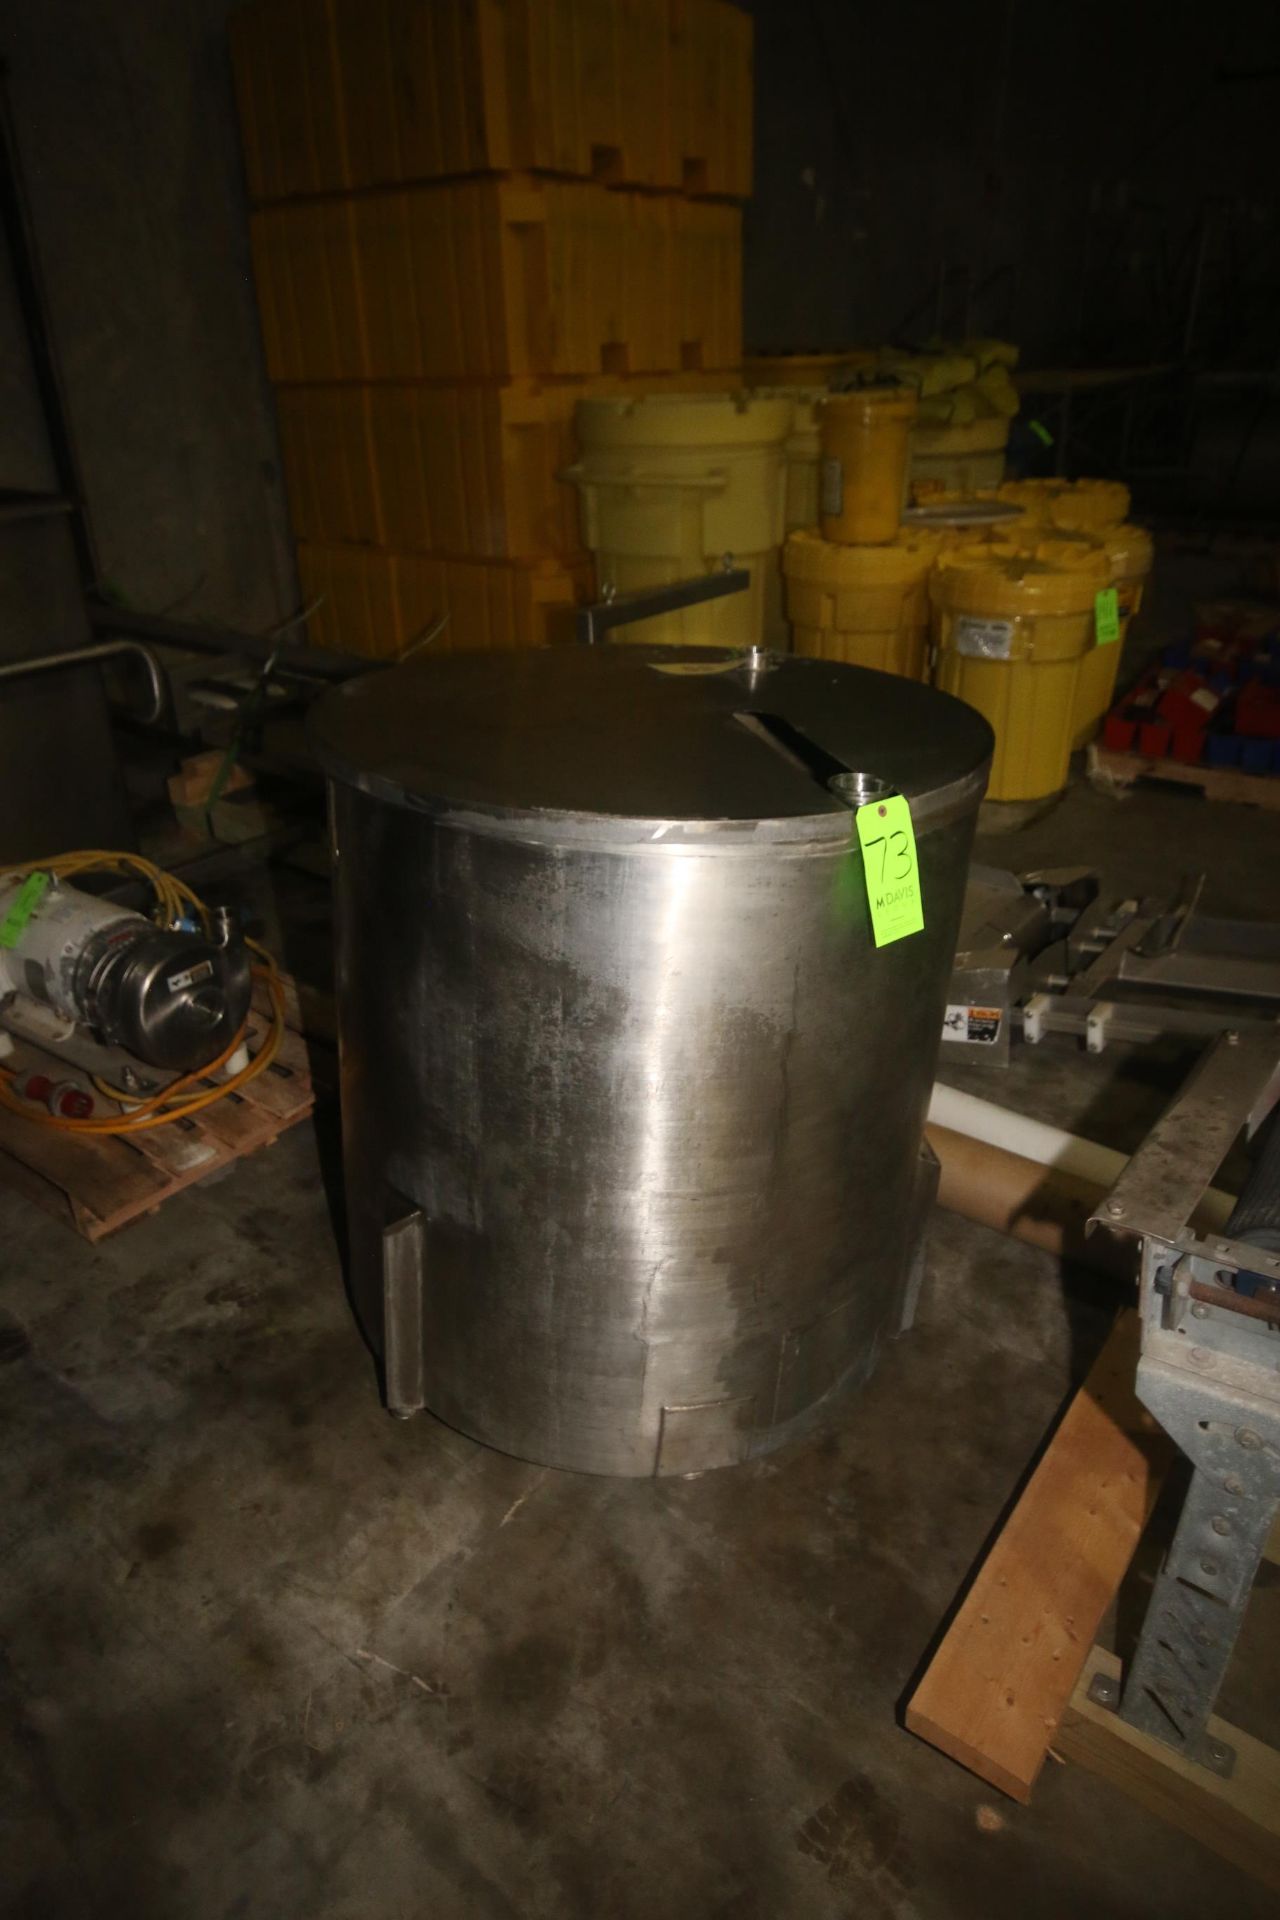 Aprox. 150 Gal. Vertical Single Wall S/S Tank, Tank Dims.: Aprox. 35" Tall x 36" Dia., with S/S